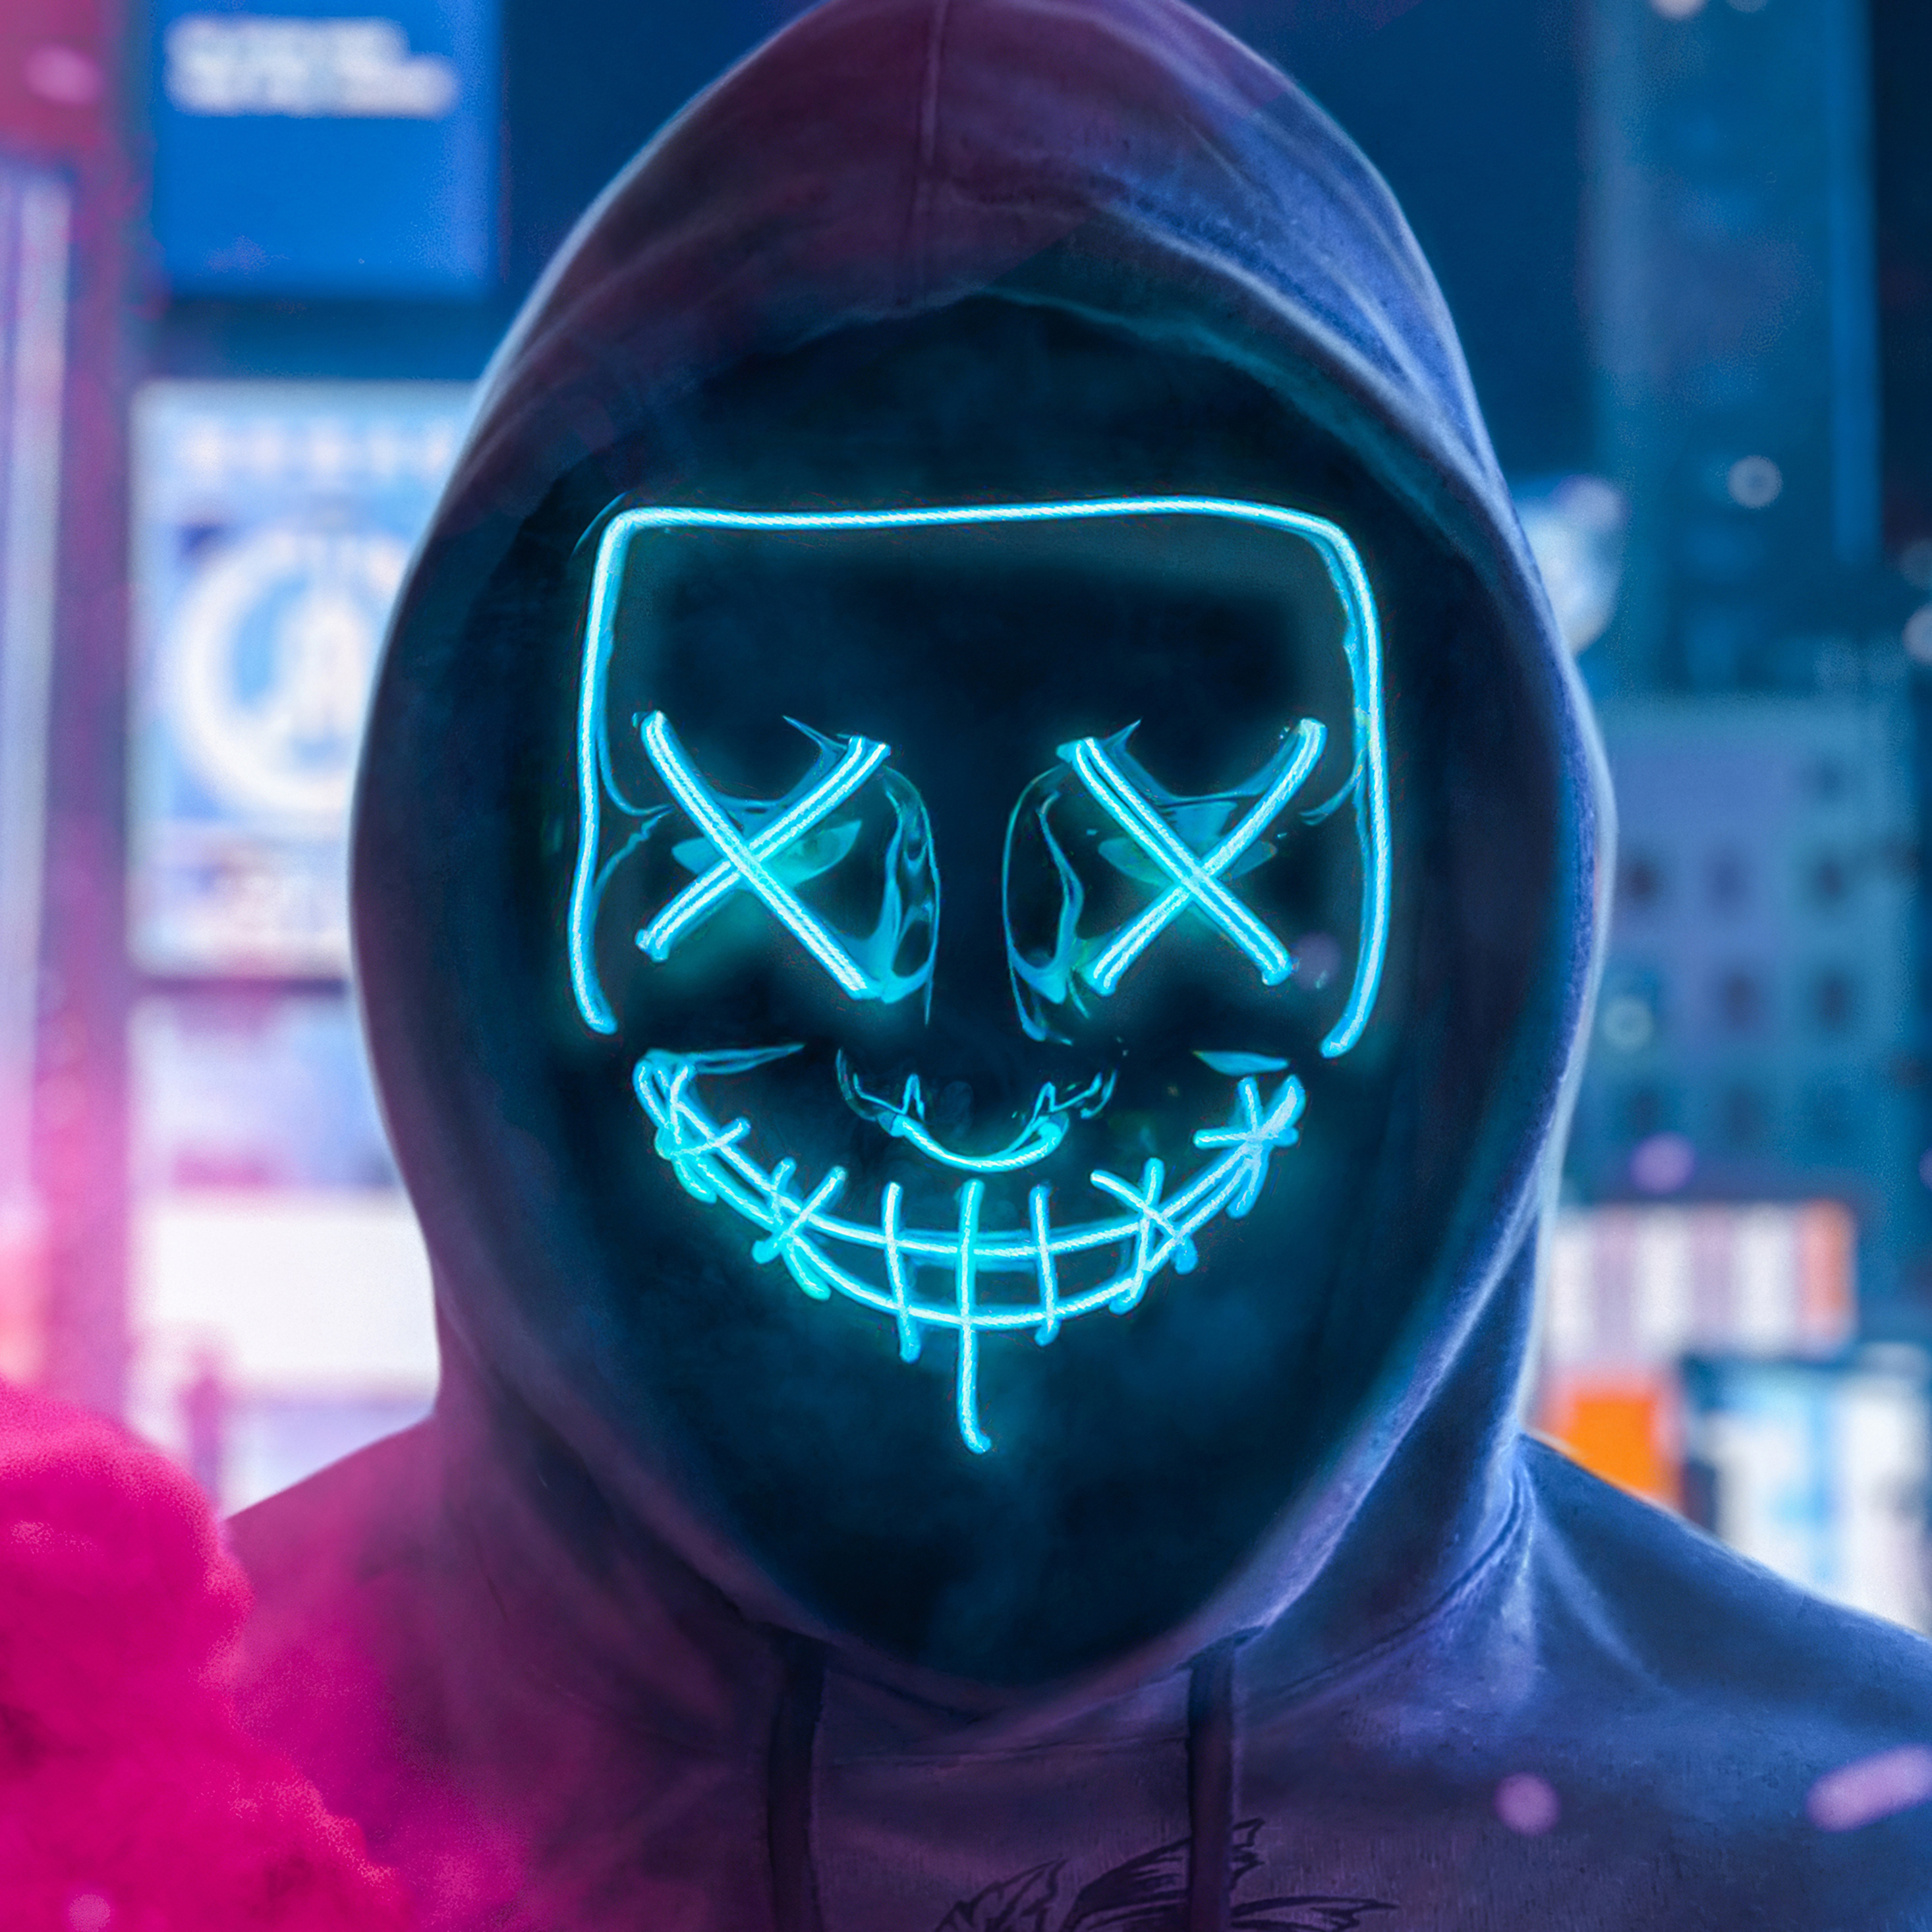 X mask guy with smoke bomb in hand k ipad pro retina display hd k wallpapers images backgrounds photos and pictures